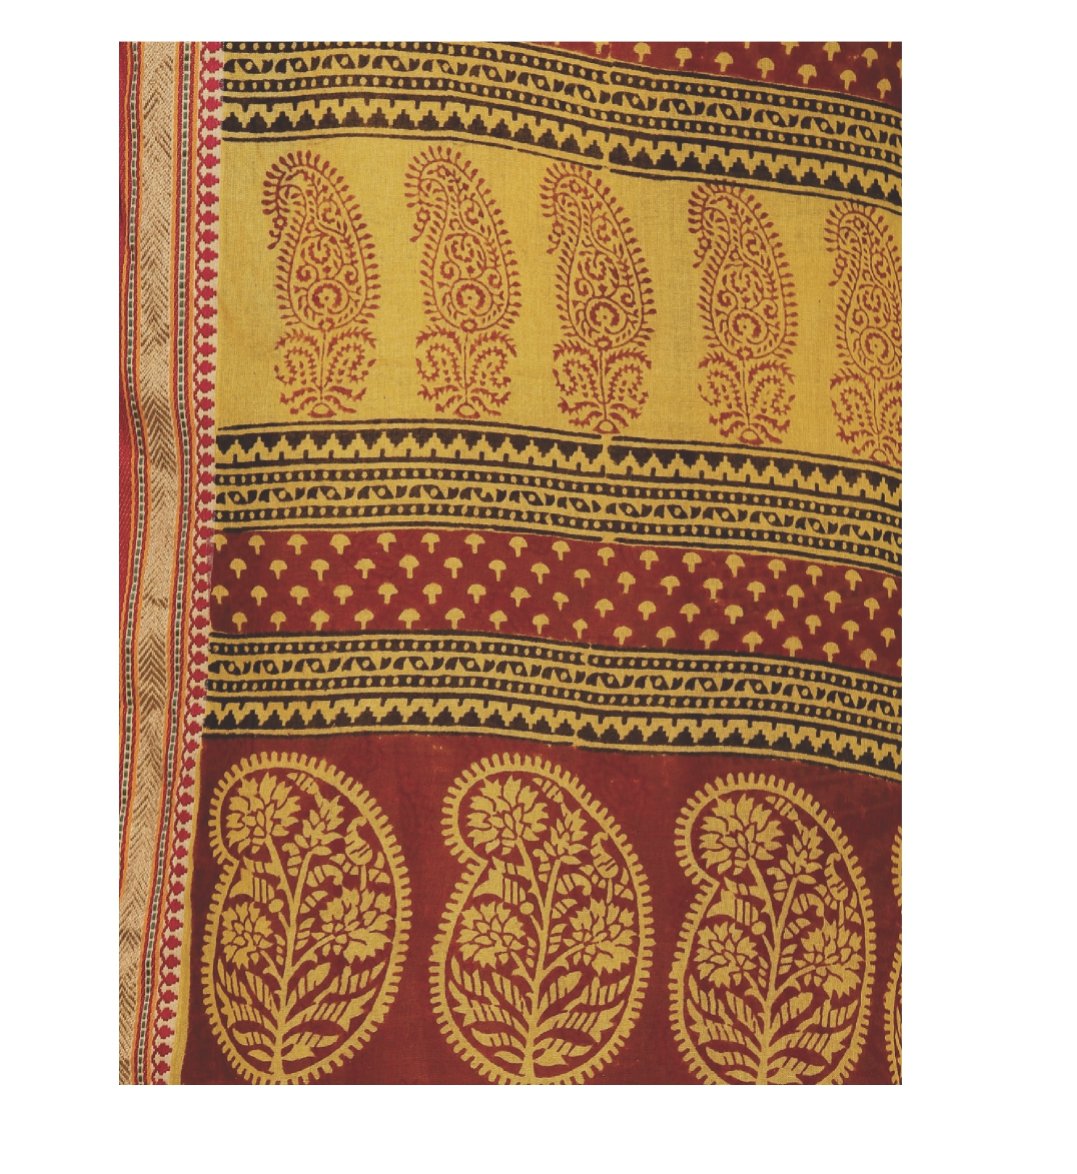 Mustard Yellow Cotton Hand Block Bagh Print Handcrafted Saree-Saree-Kalakari India-ZIBASA0067-Bagh, Cotton, Geographical Indication, Hand Blocks, Hand Crafted, Heritage Prints, Natural Dyes, Sarees, Sustainable Fabrics-[Linen,Ethnic,wear,Fashionista,Handloom,Handicraft,Indigo,blockprint,block,print,Cotton,Chanderi,Blue, latest,classy,party,bollywood,trendy,summer,style,traditional,formal,elegant,unique,style,hand,block,print, dabu,booti,gift,present,glamorous,affordable,collectible,Sari,Saree,pr